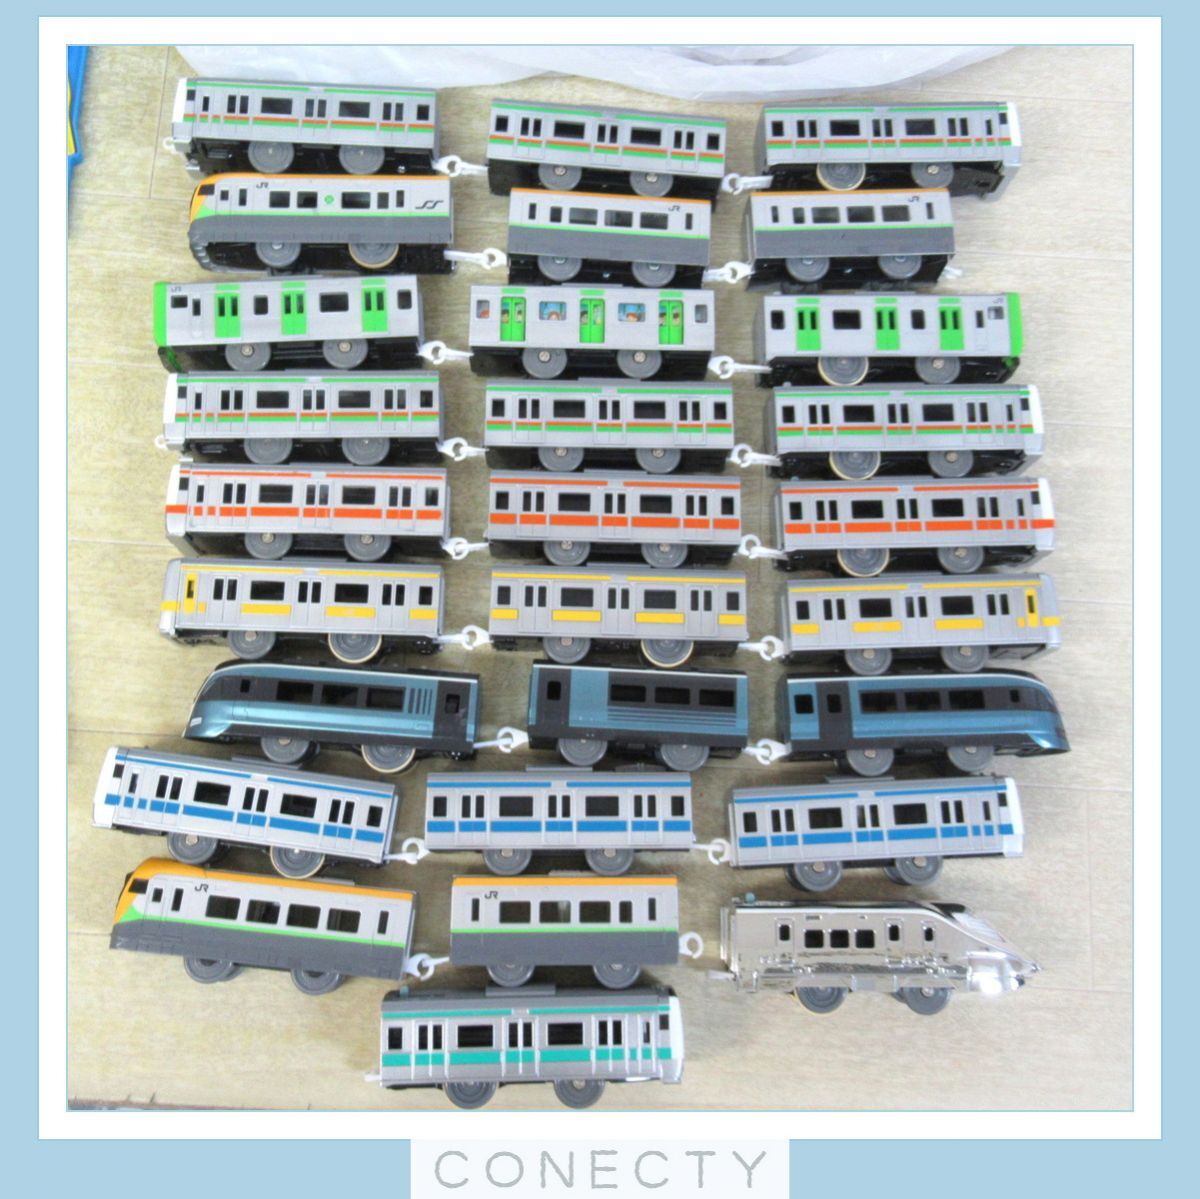  Plarail rail /../ extension . tunnel / station / operation vehicle large amount together set E233 series centre line /safi-ru.../E235 series mountain hand line other [GN[SX